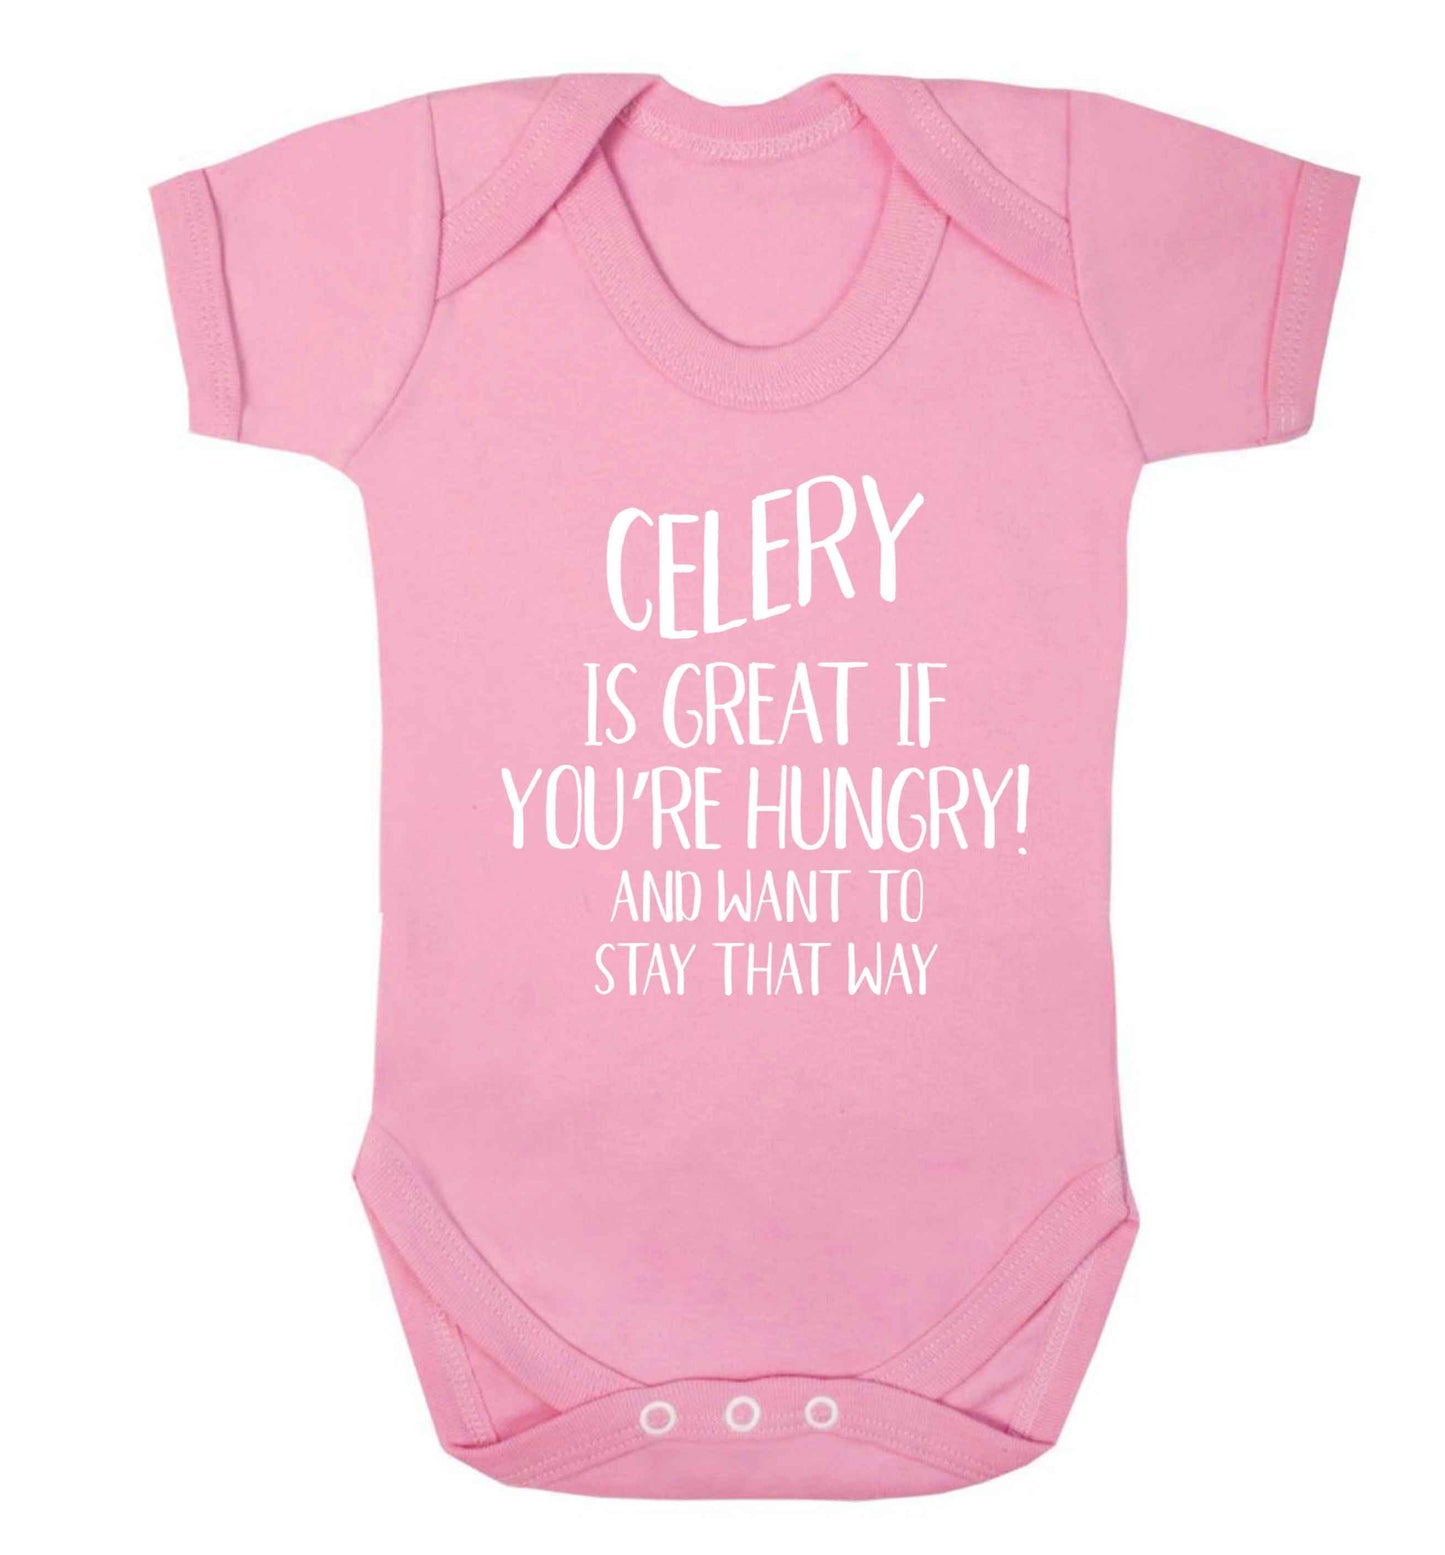 Cellery is great when you're hungry and want to stay that way Baby Vest pale pink 18-24 months